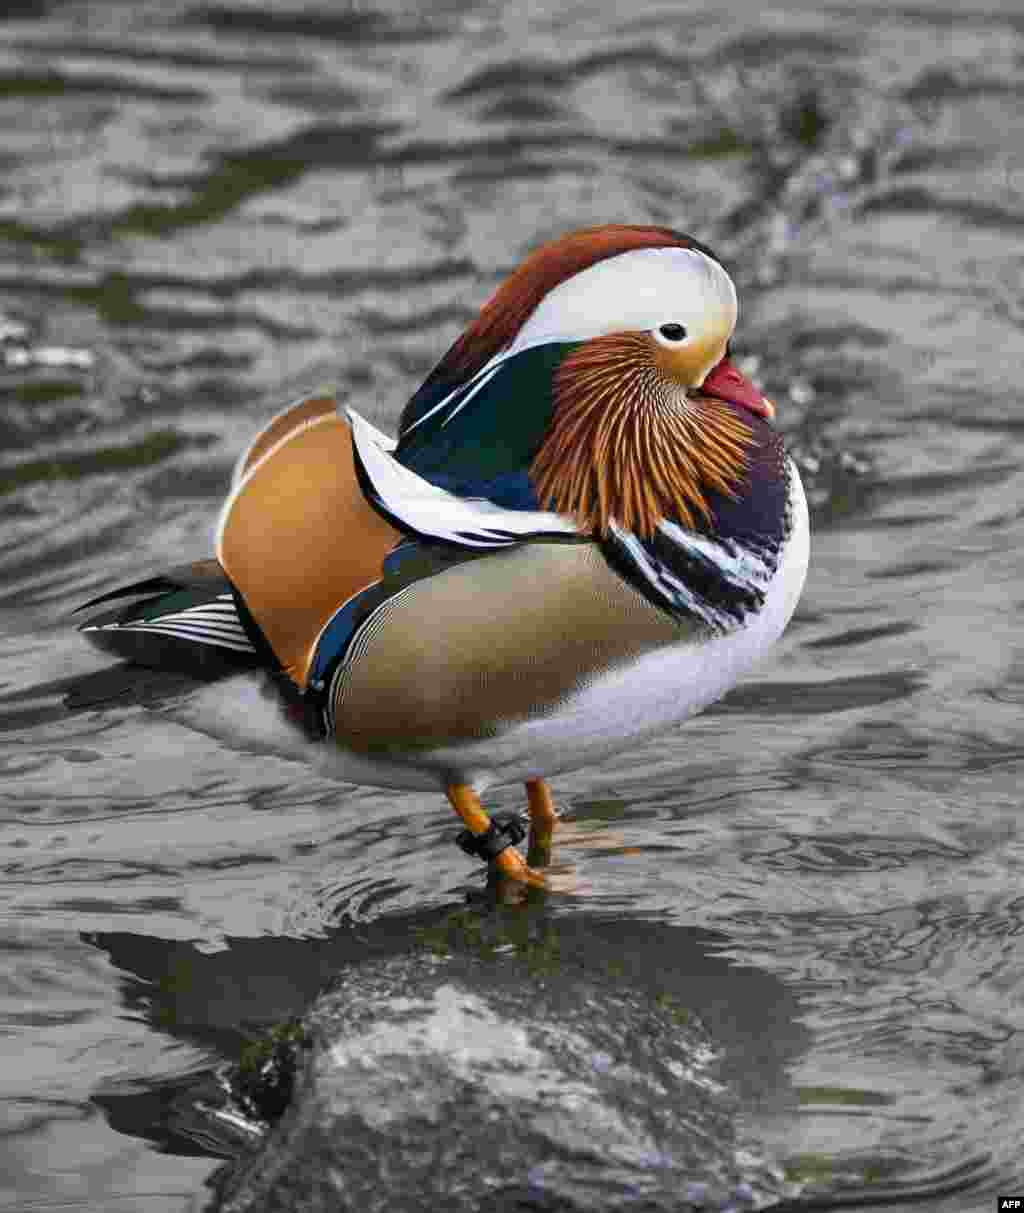 The now famous Mandarin Duck, nicknamed Mandarin Patinkin, makes an appearance on at a pond in Central Park in New York, Nov. 27, 2018.